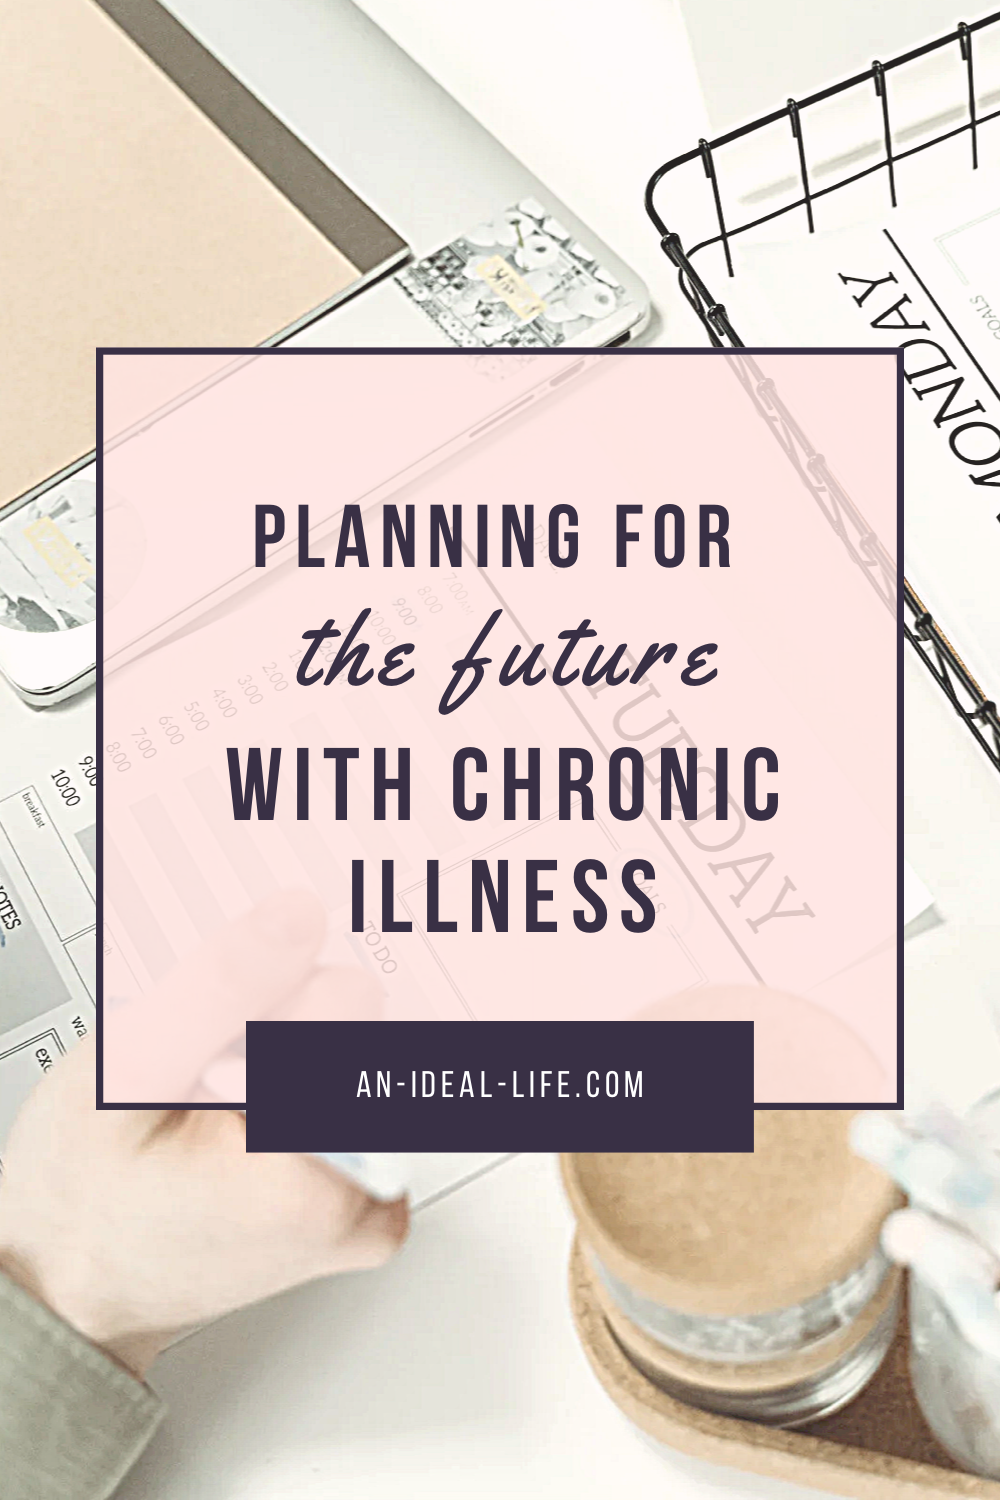 Planning for the Future With Chronic Illness